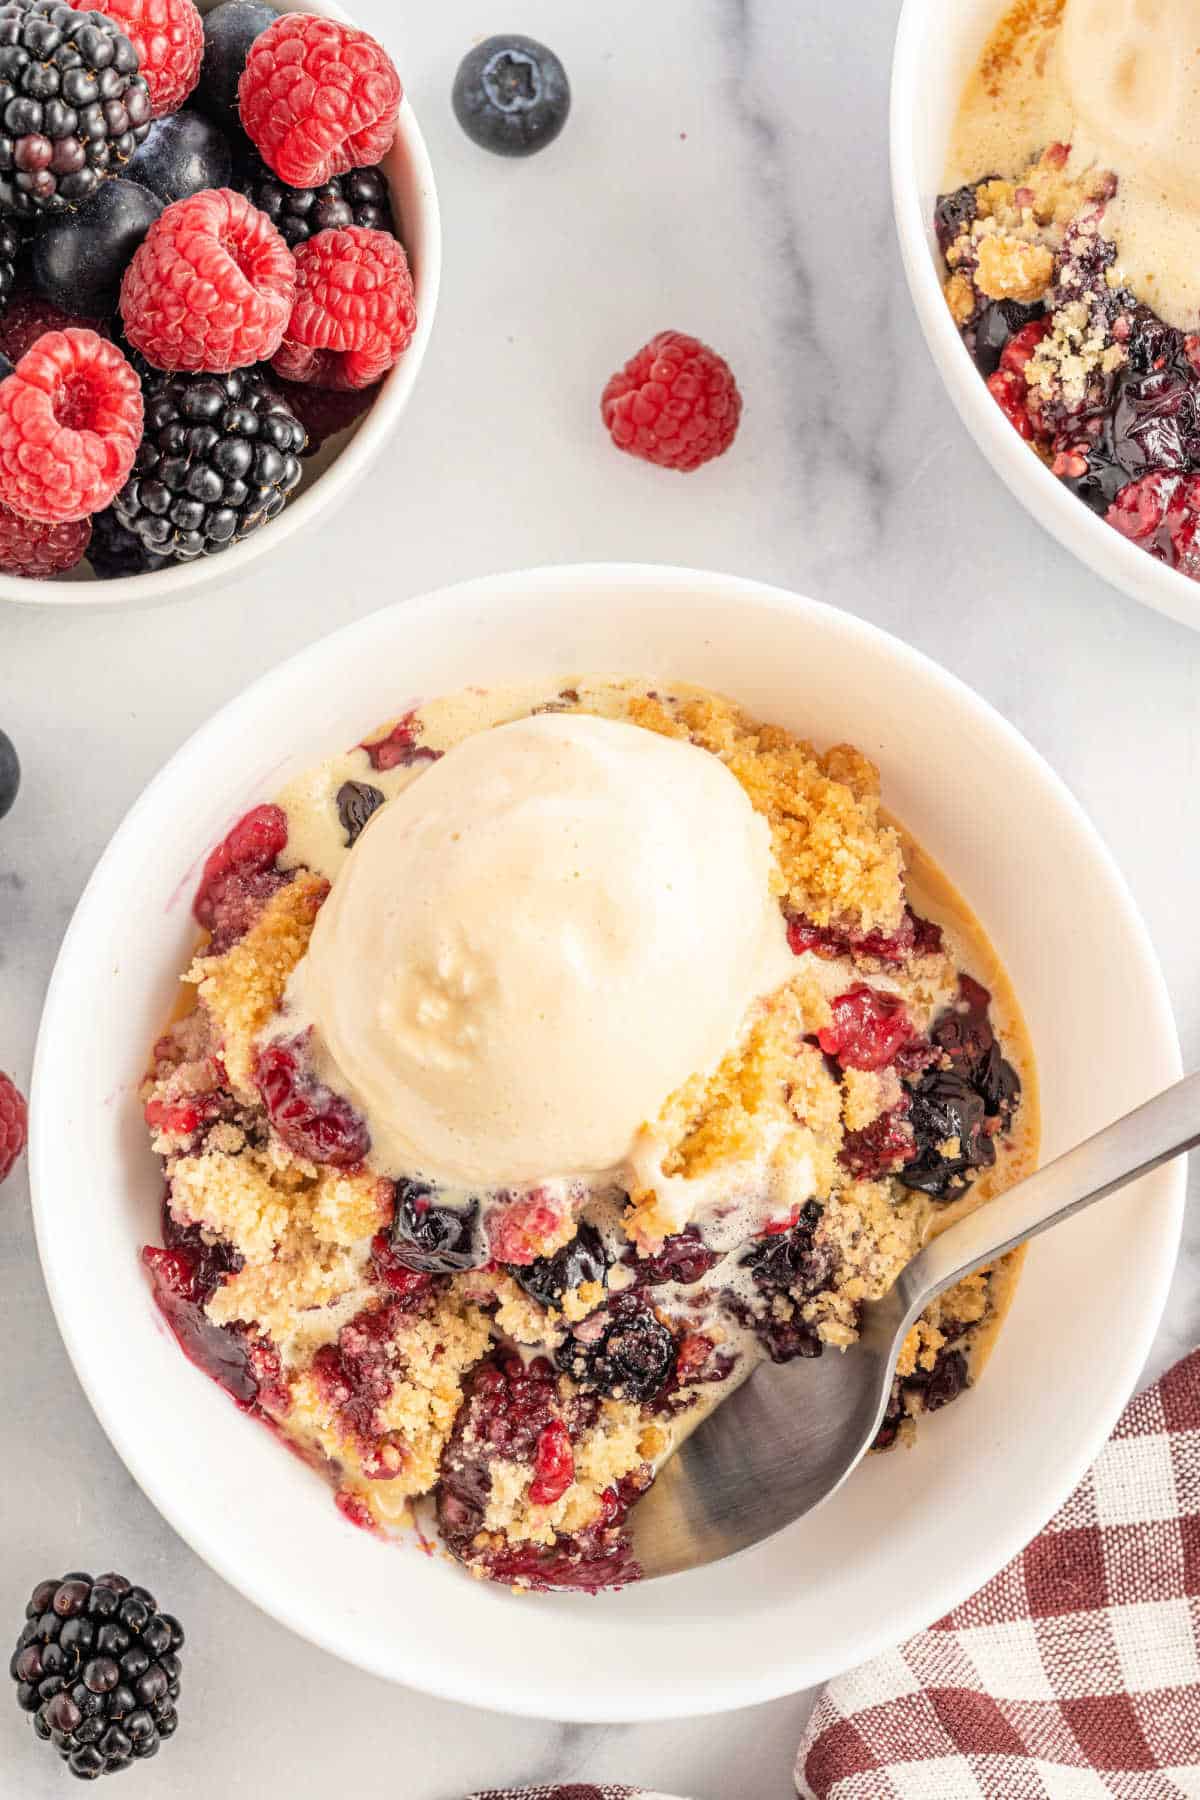 Berry crumble served in a bowl with ice cream.